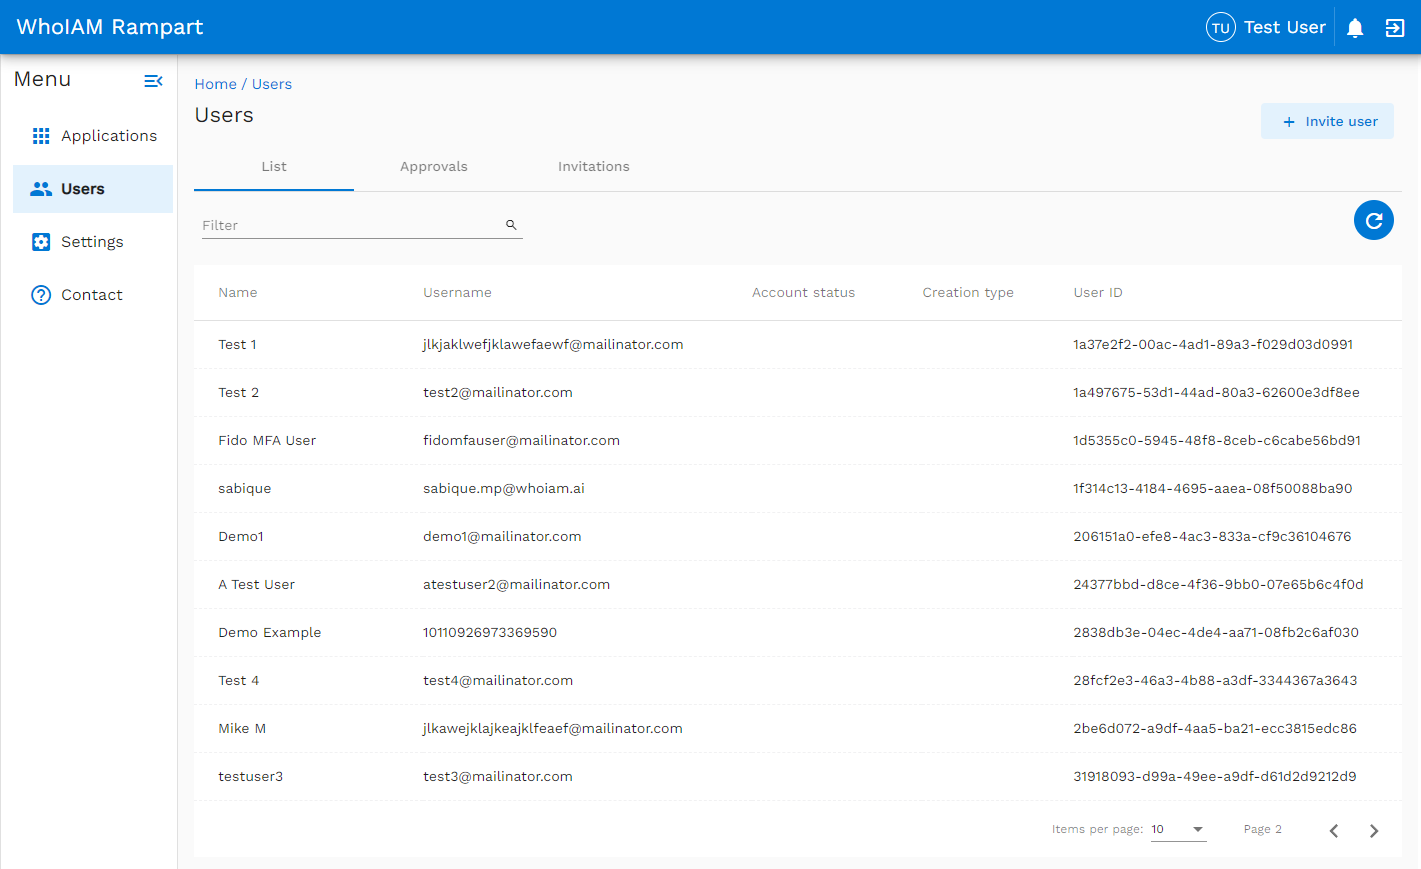 Screenshot of the WhoIAM Rampart user list in the Azure AD B2C tenant.